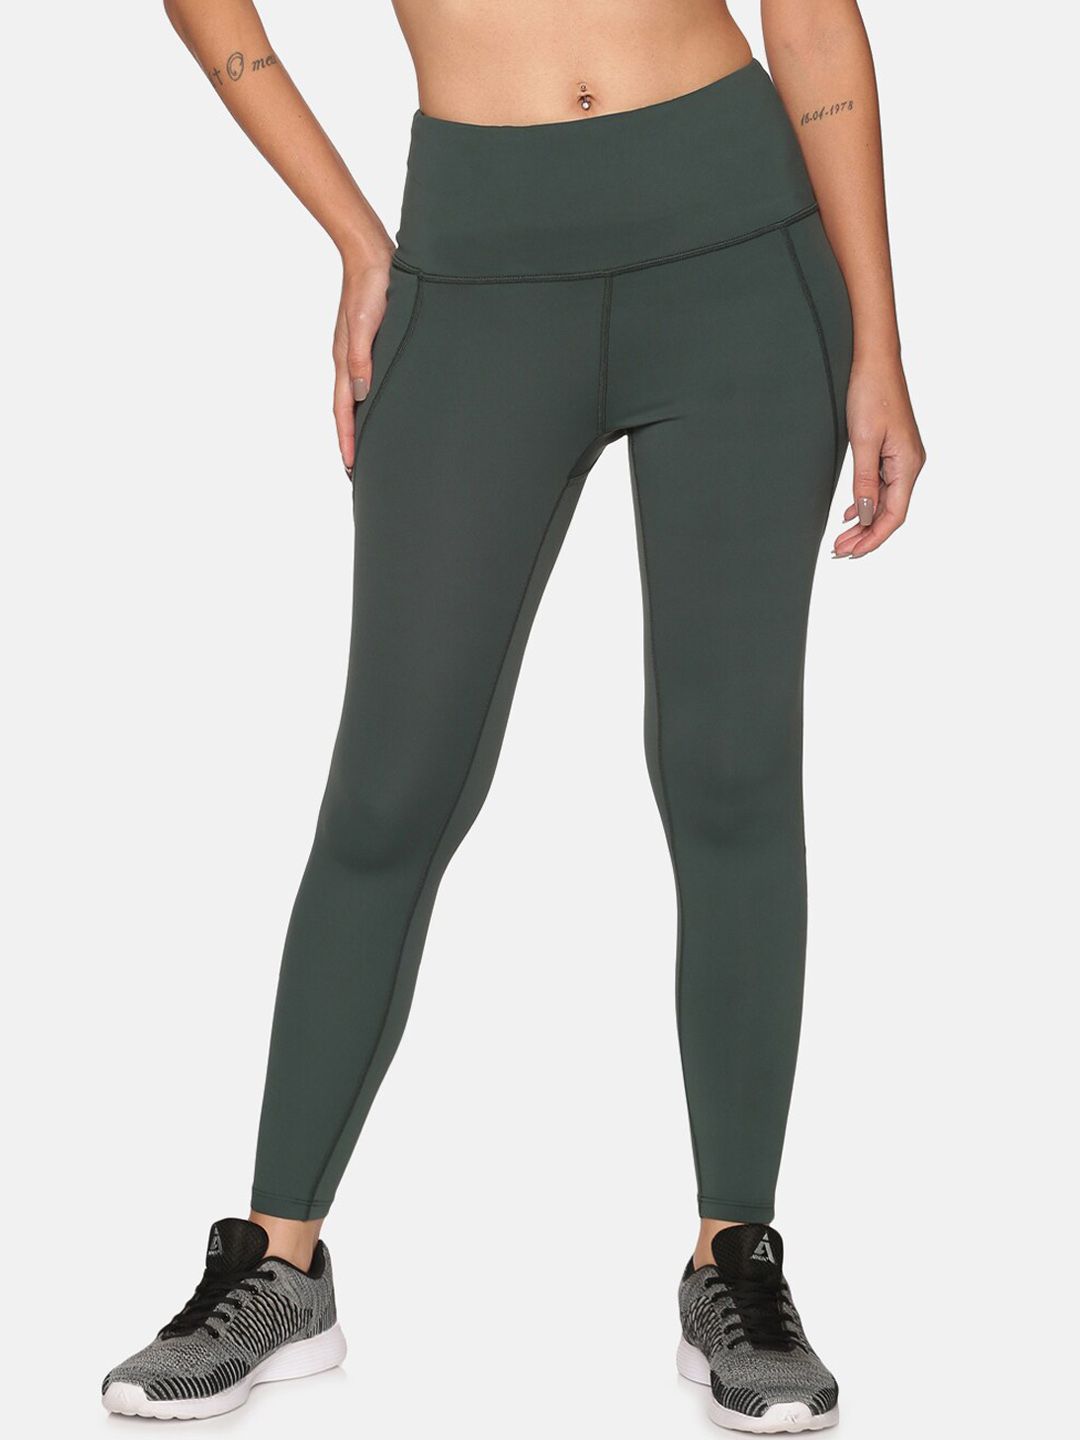 BlissClub Women Green Super Stretchy and High Waisted The Ultimate Leggings Price in India